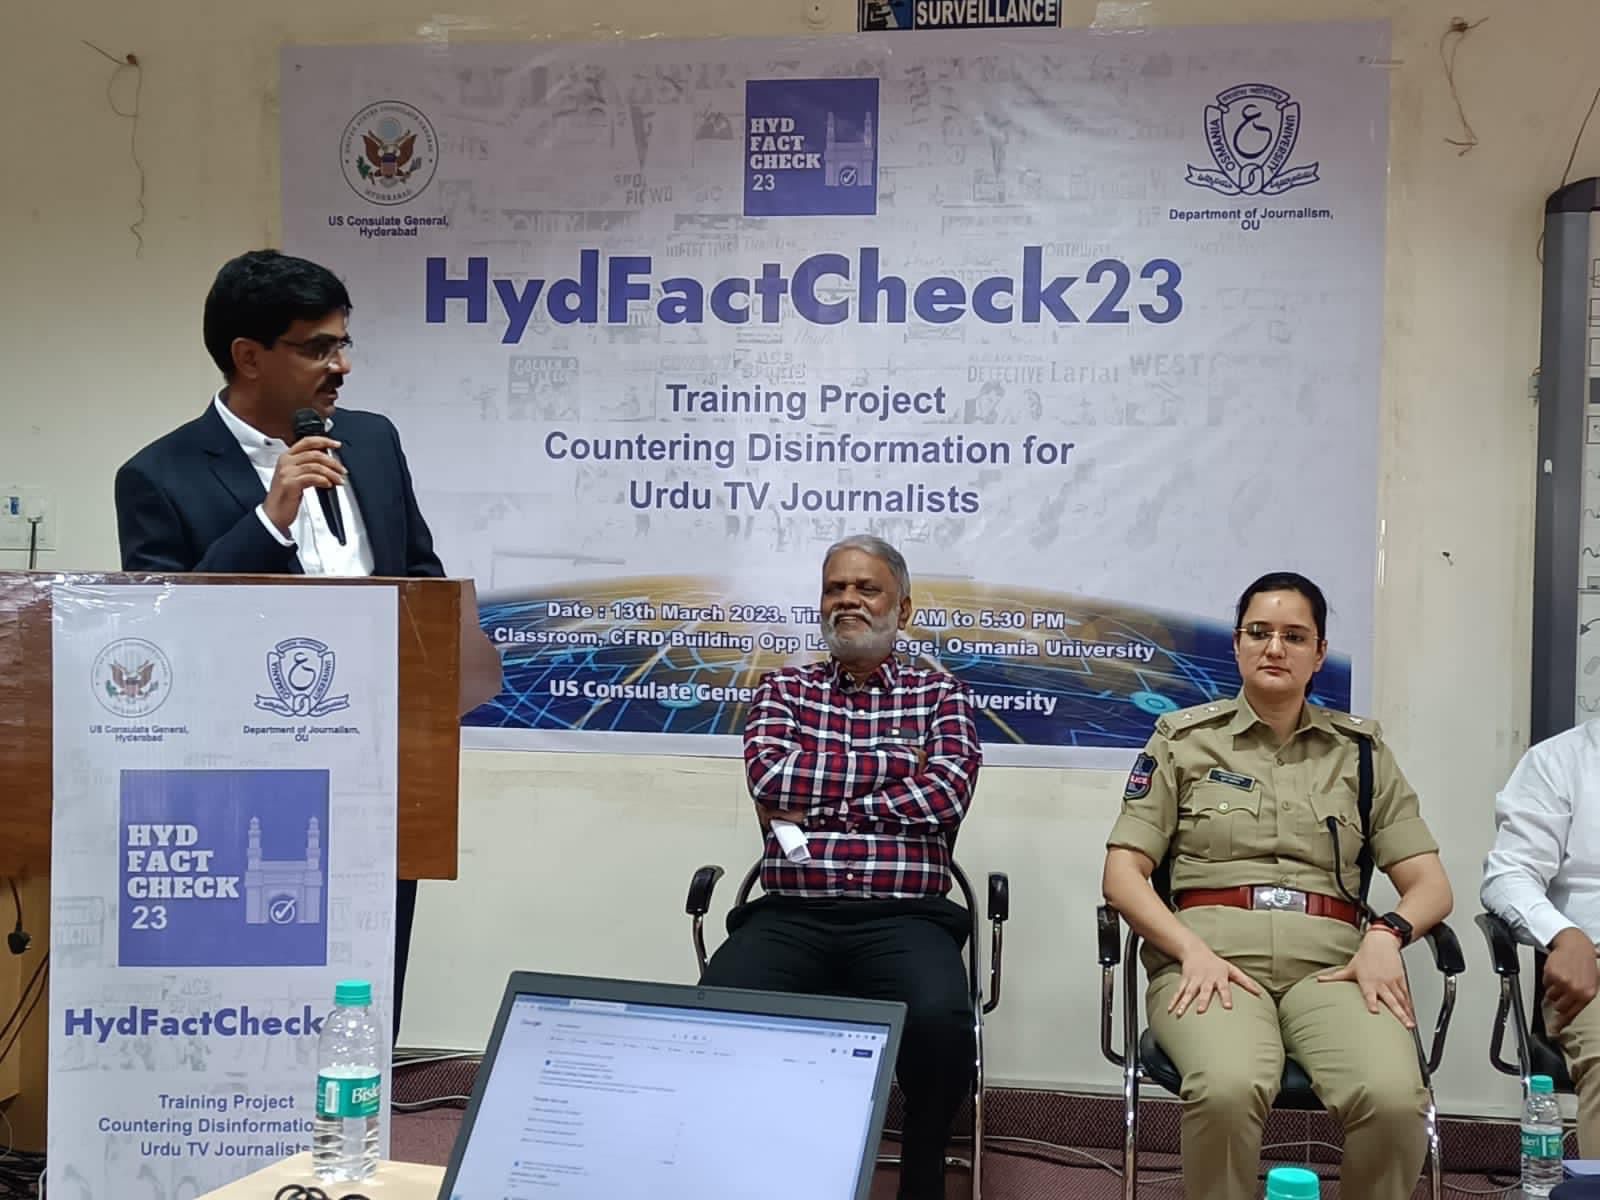 Maulana Azad National Urdu University, Osmania University and US consulate “Countering disinformation for Urdu TV journalists” workshops held in the city twice so far #hydfactcheck23 Lead trainer for the Urdu journalists